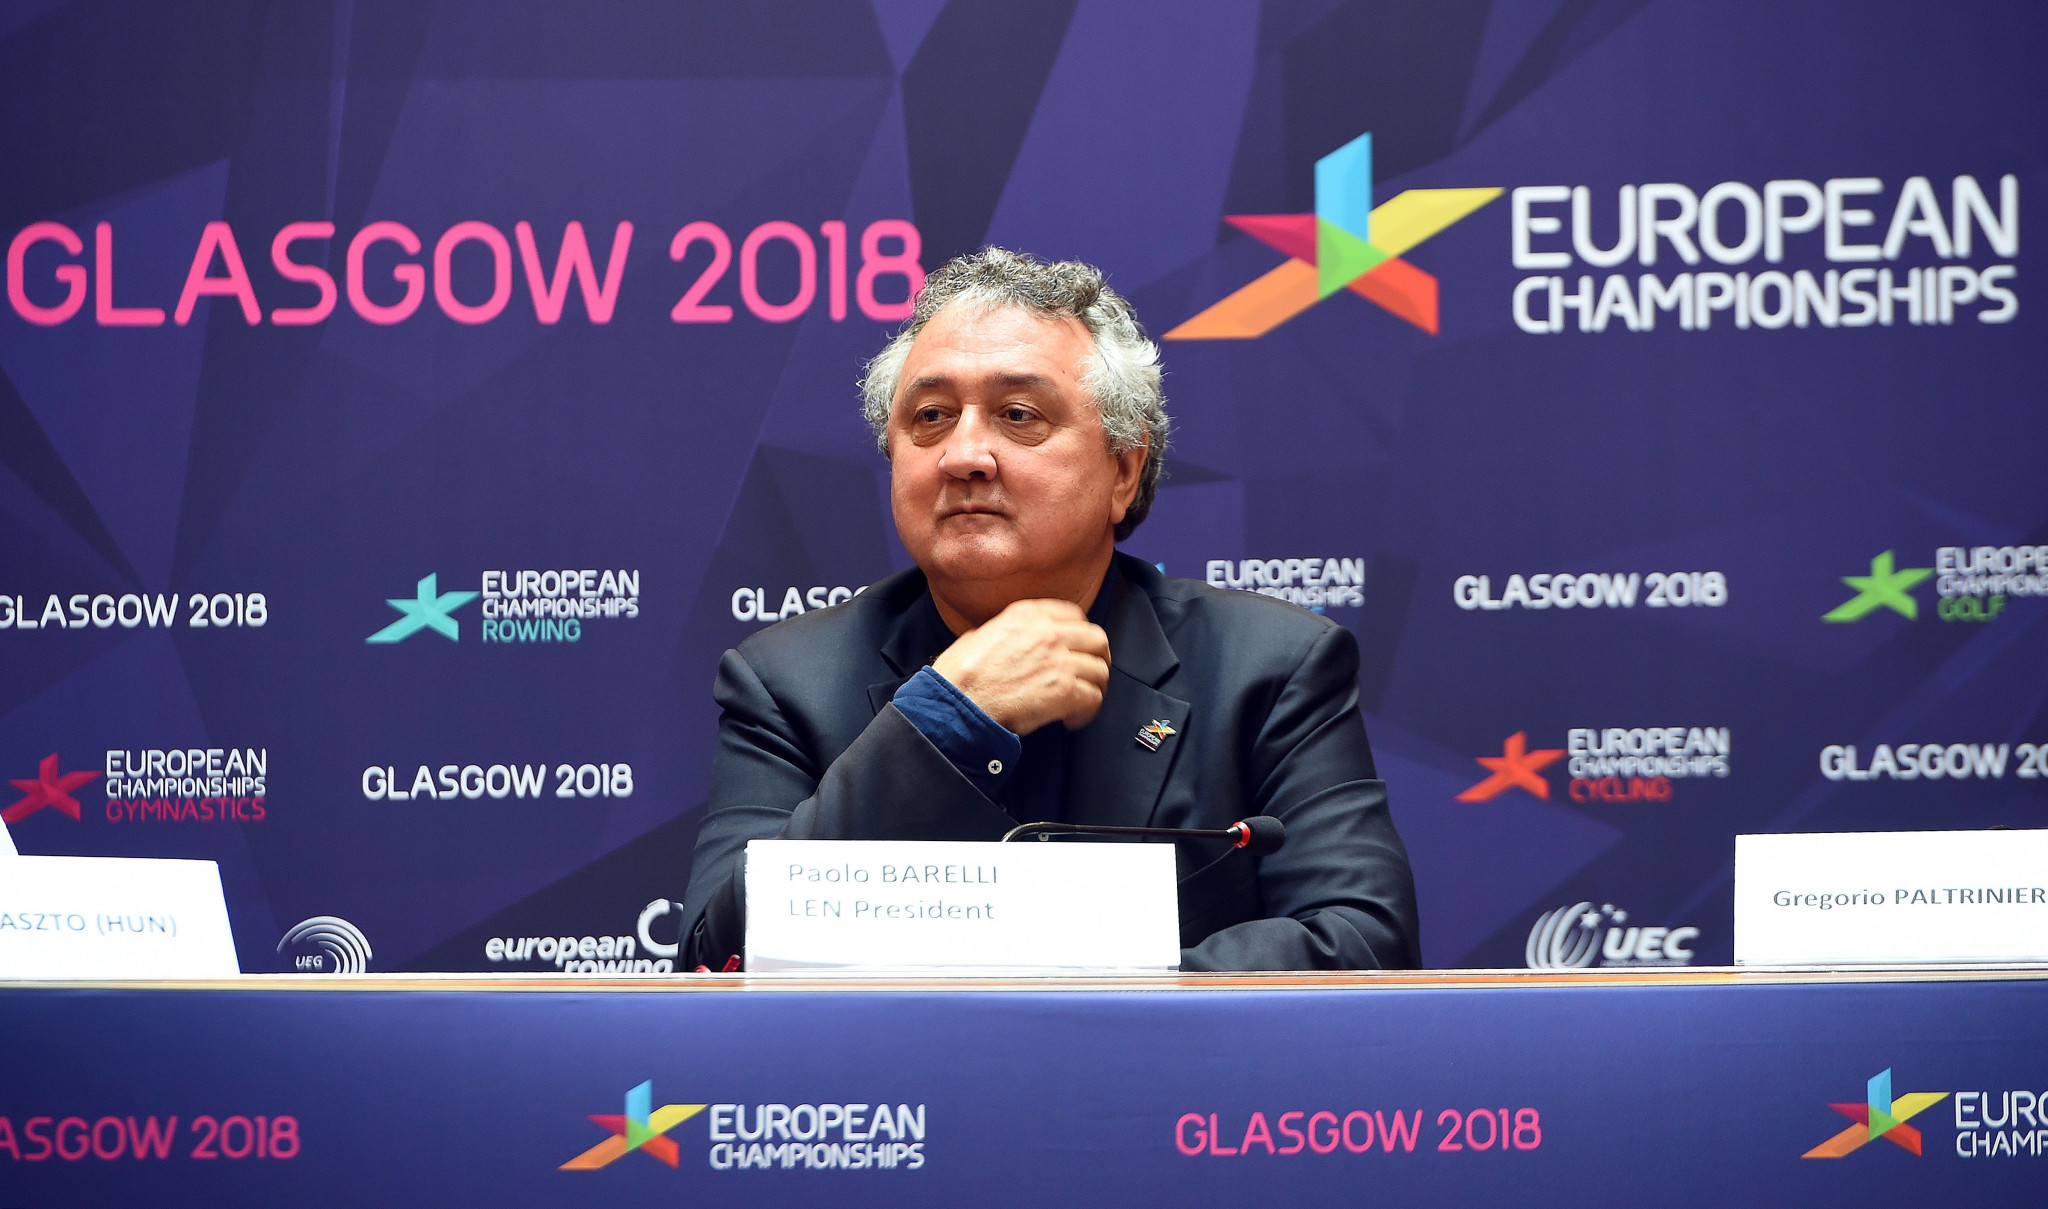 Italy's Paolo Barelli had led the European Swimming League since 2012, but did not stand for re-election at the Extraordinary Congress, claiming 